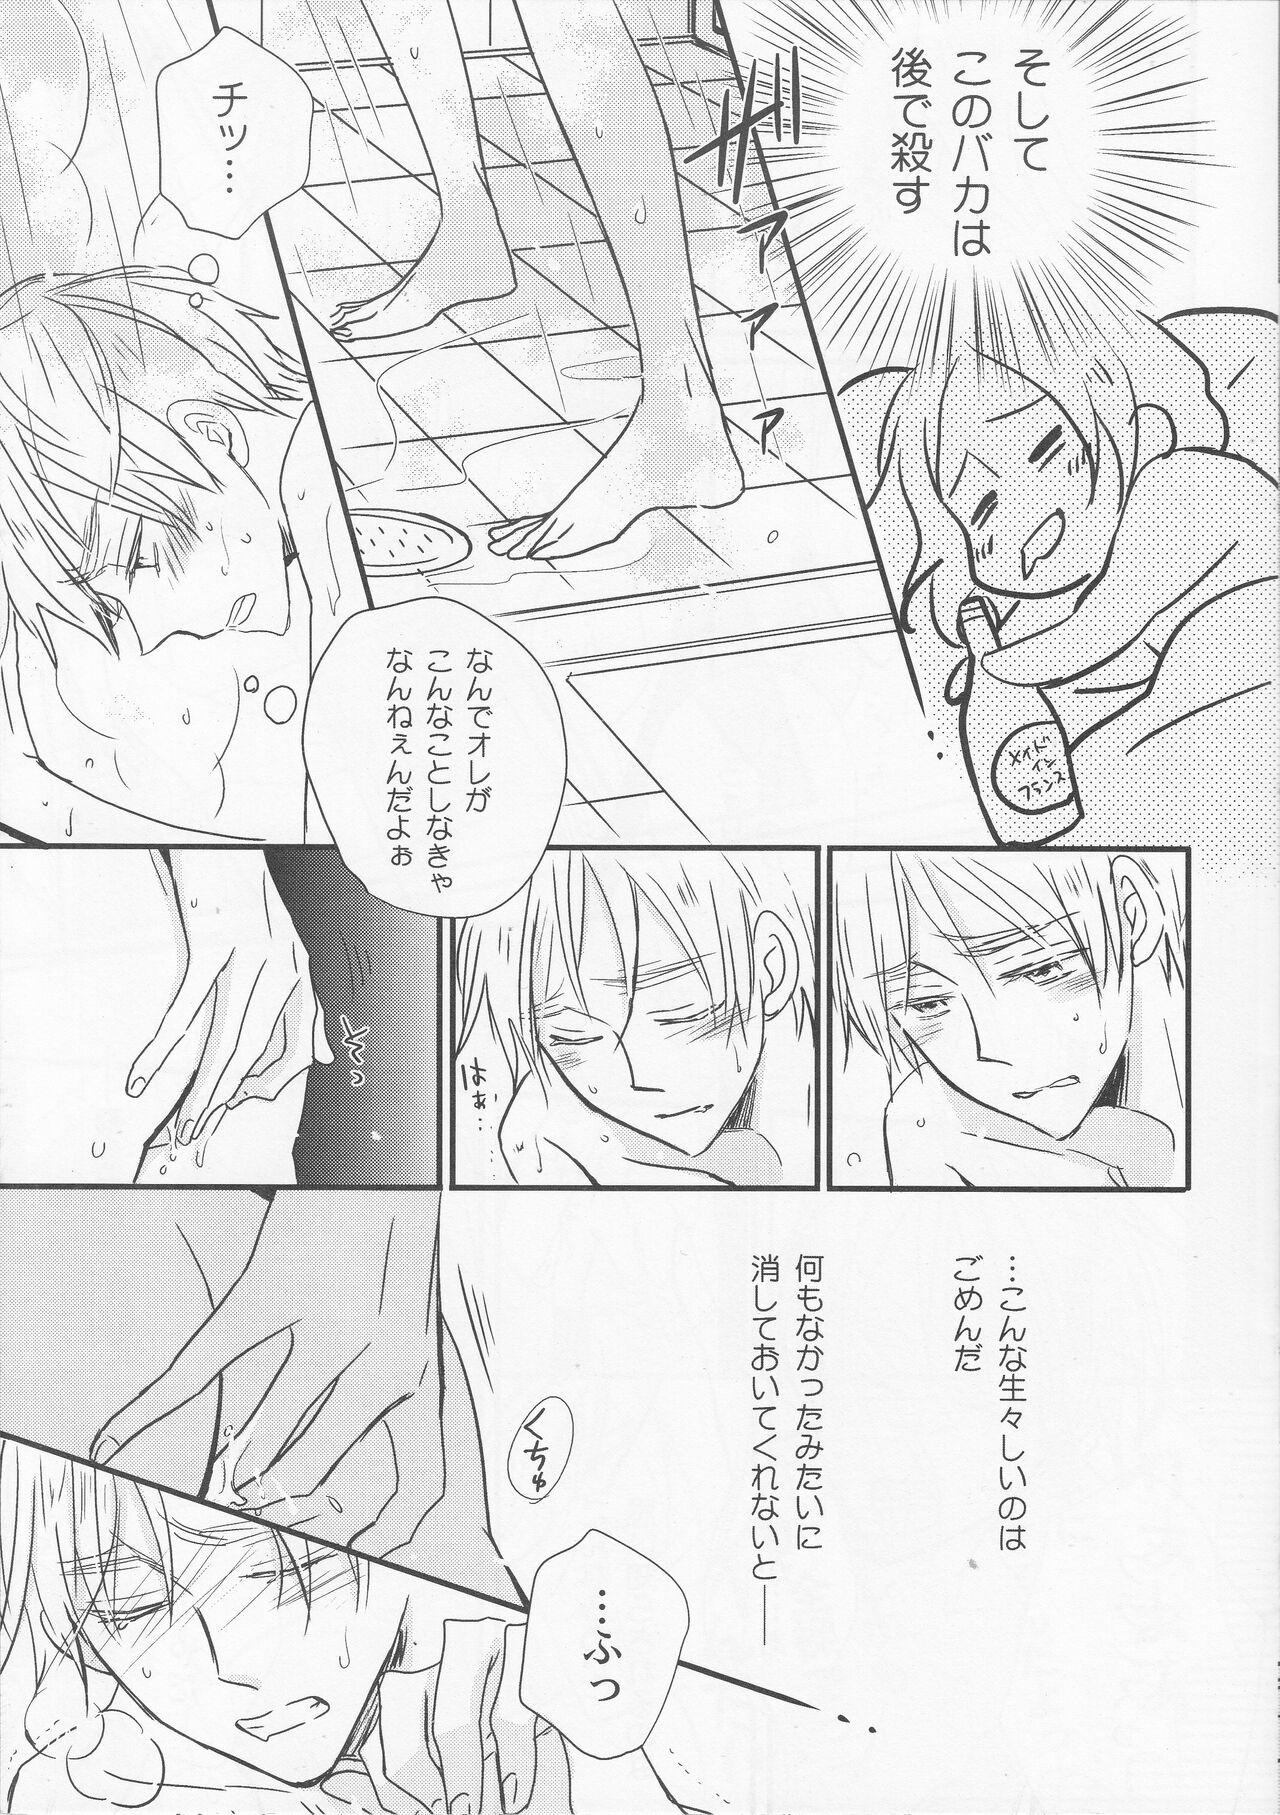 Cheating Wife unknown title - Axis powers hetalia Girl Fucked Hard - Page 6